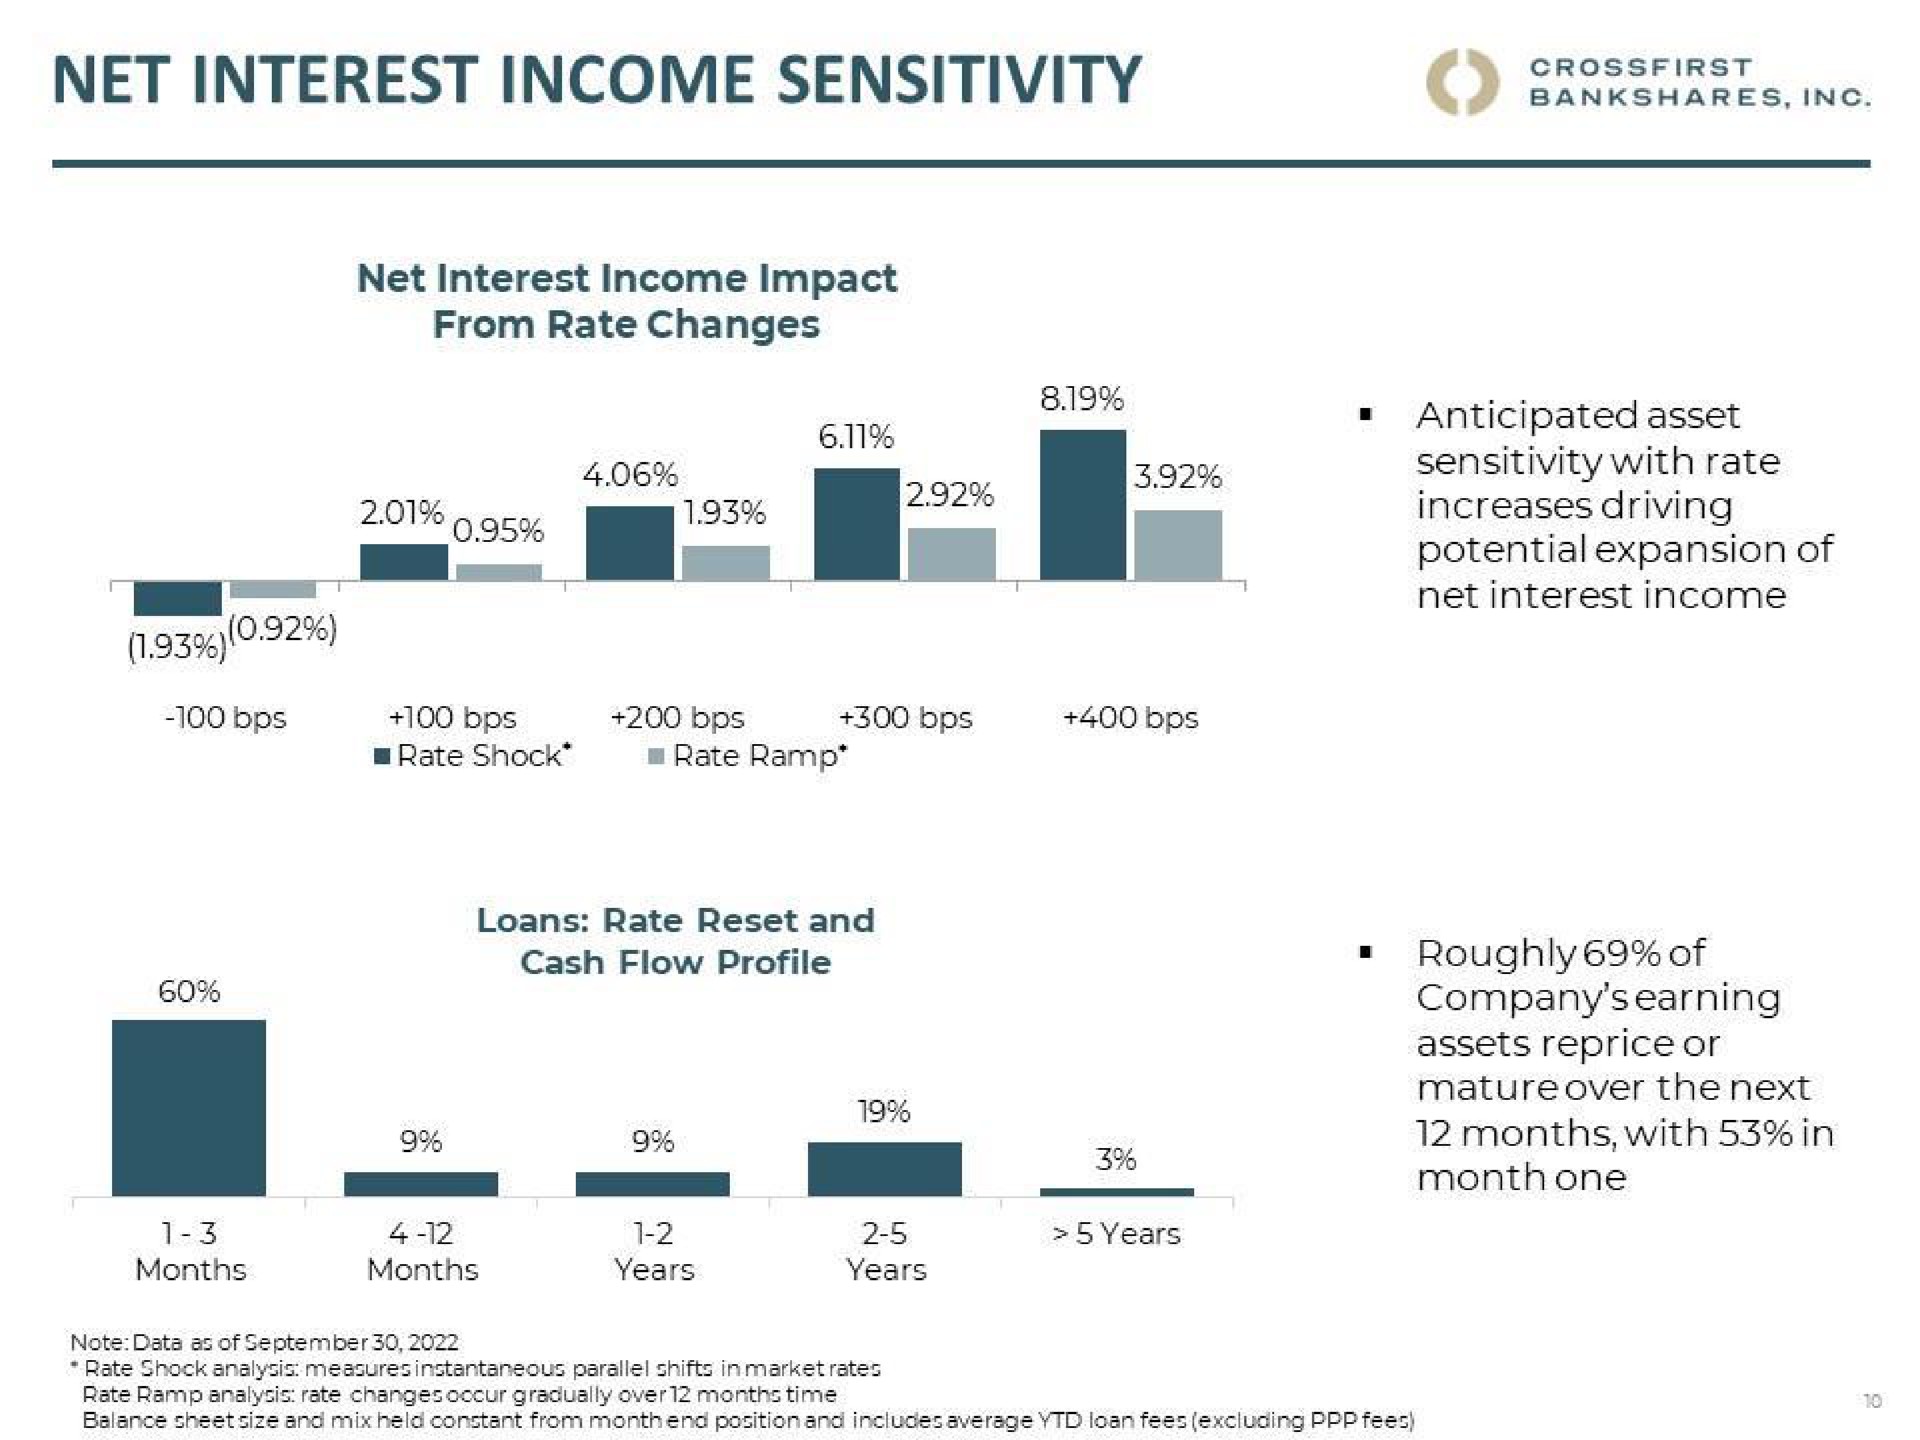 net interest income sensitivity sensitivity with rate increases driving month one | CrossFirst Bankshares